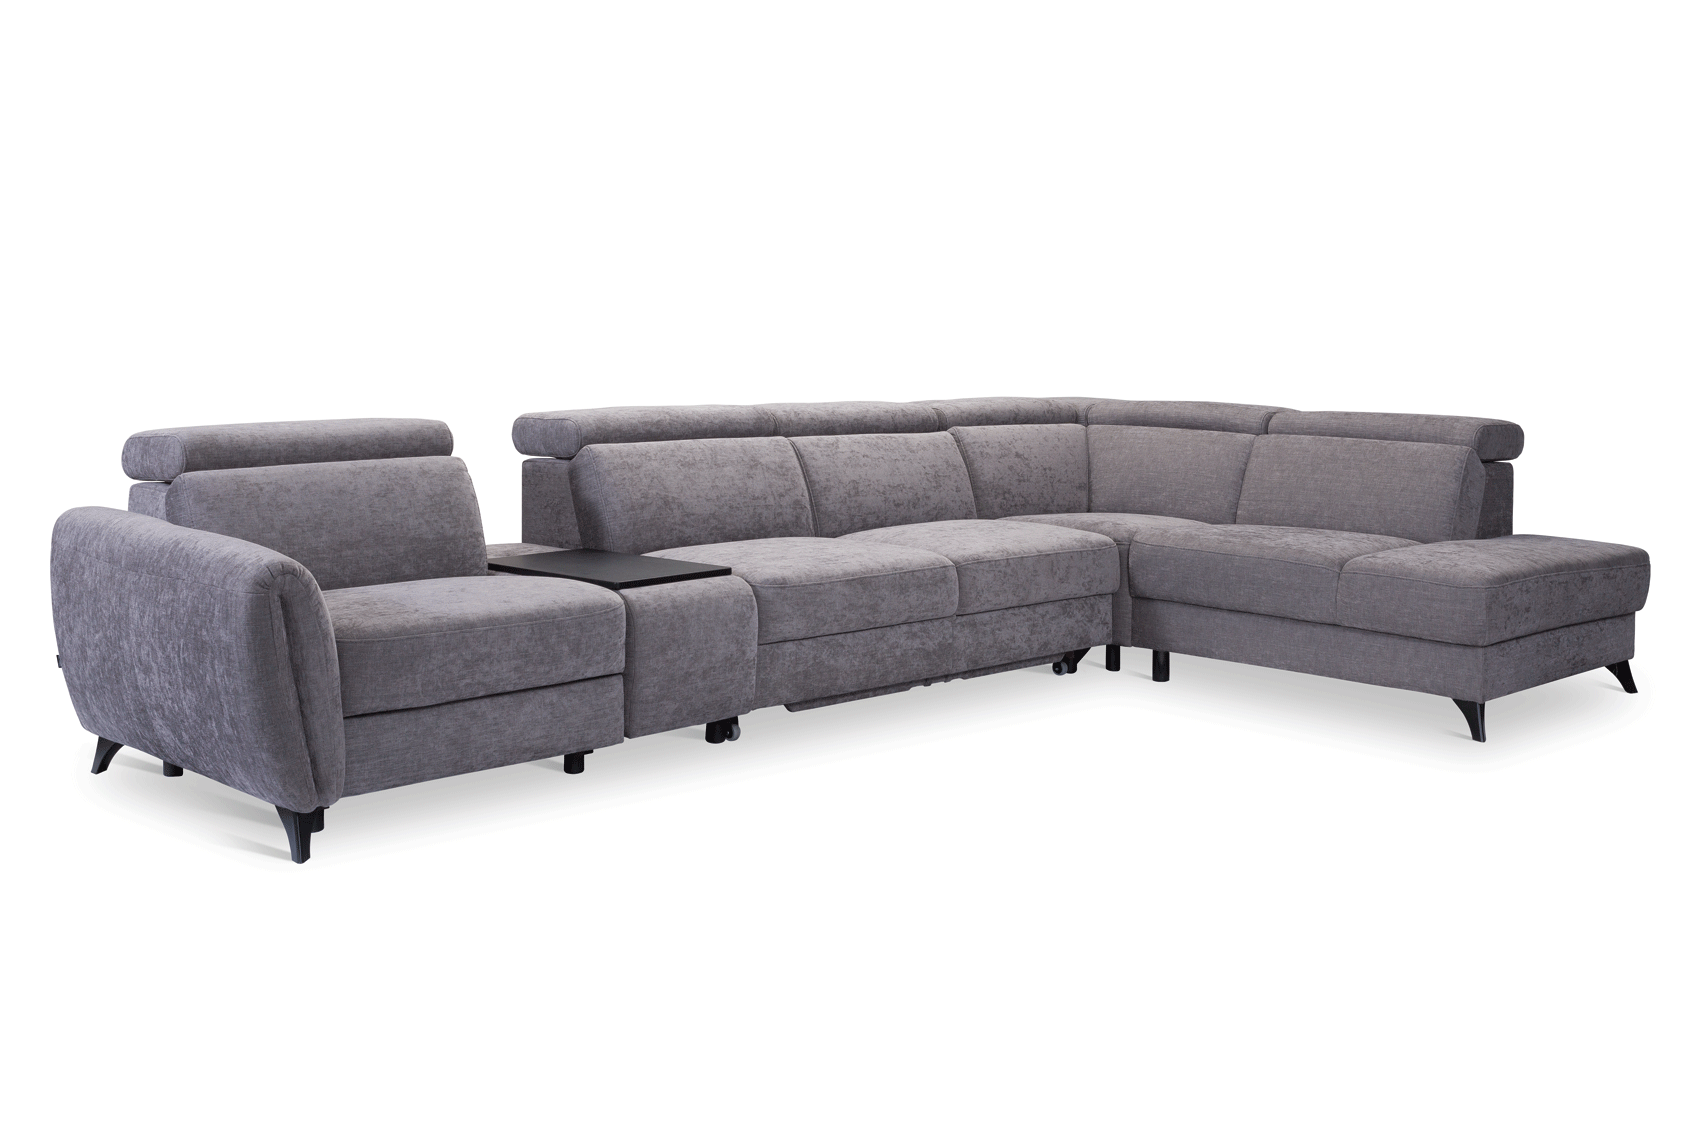 Living Room Furniture Sofas Loveseats and Chairs Lorens Sectional w/recliner, bed, bar